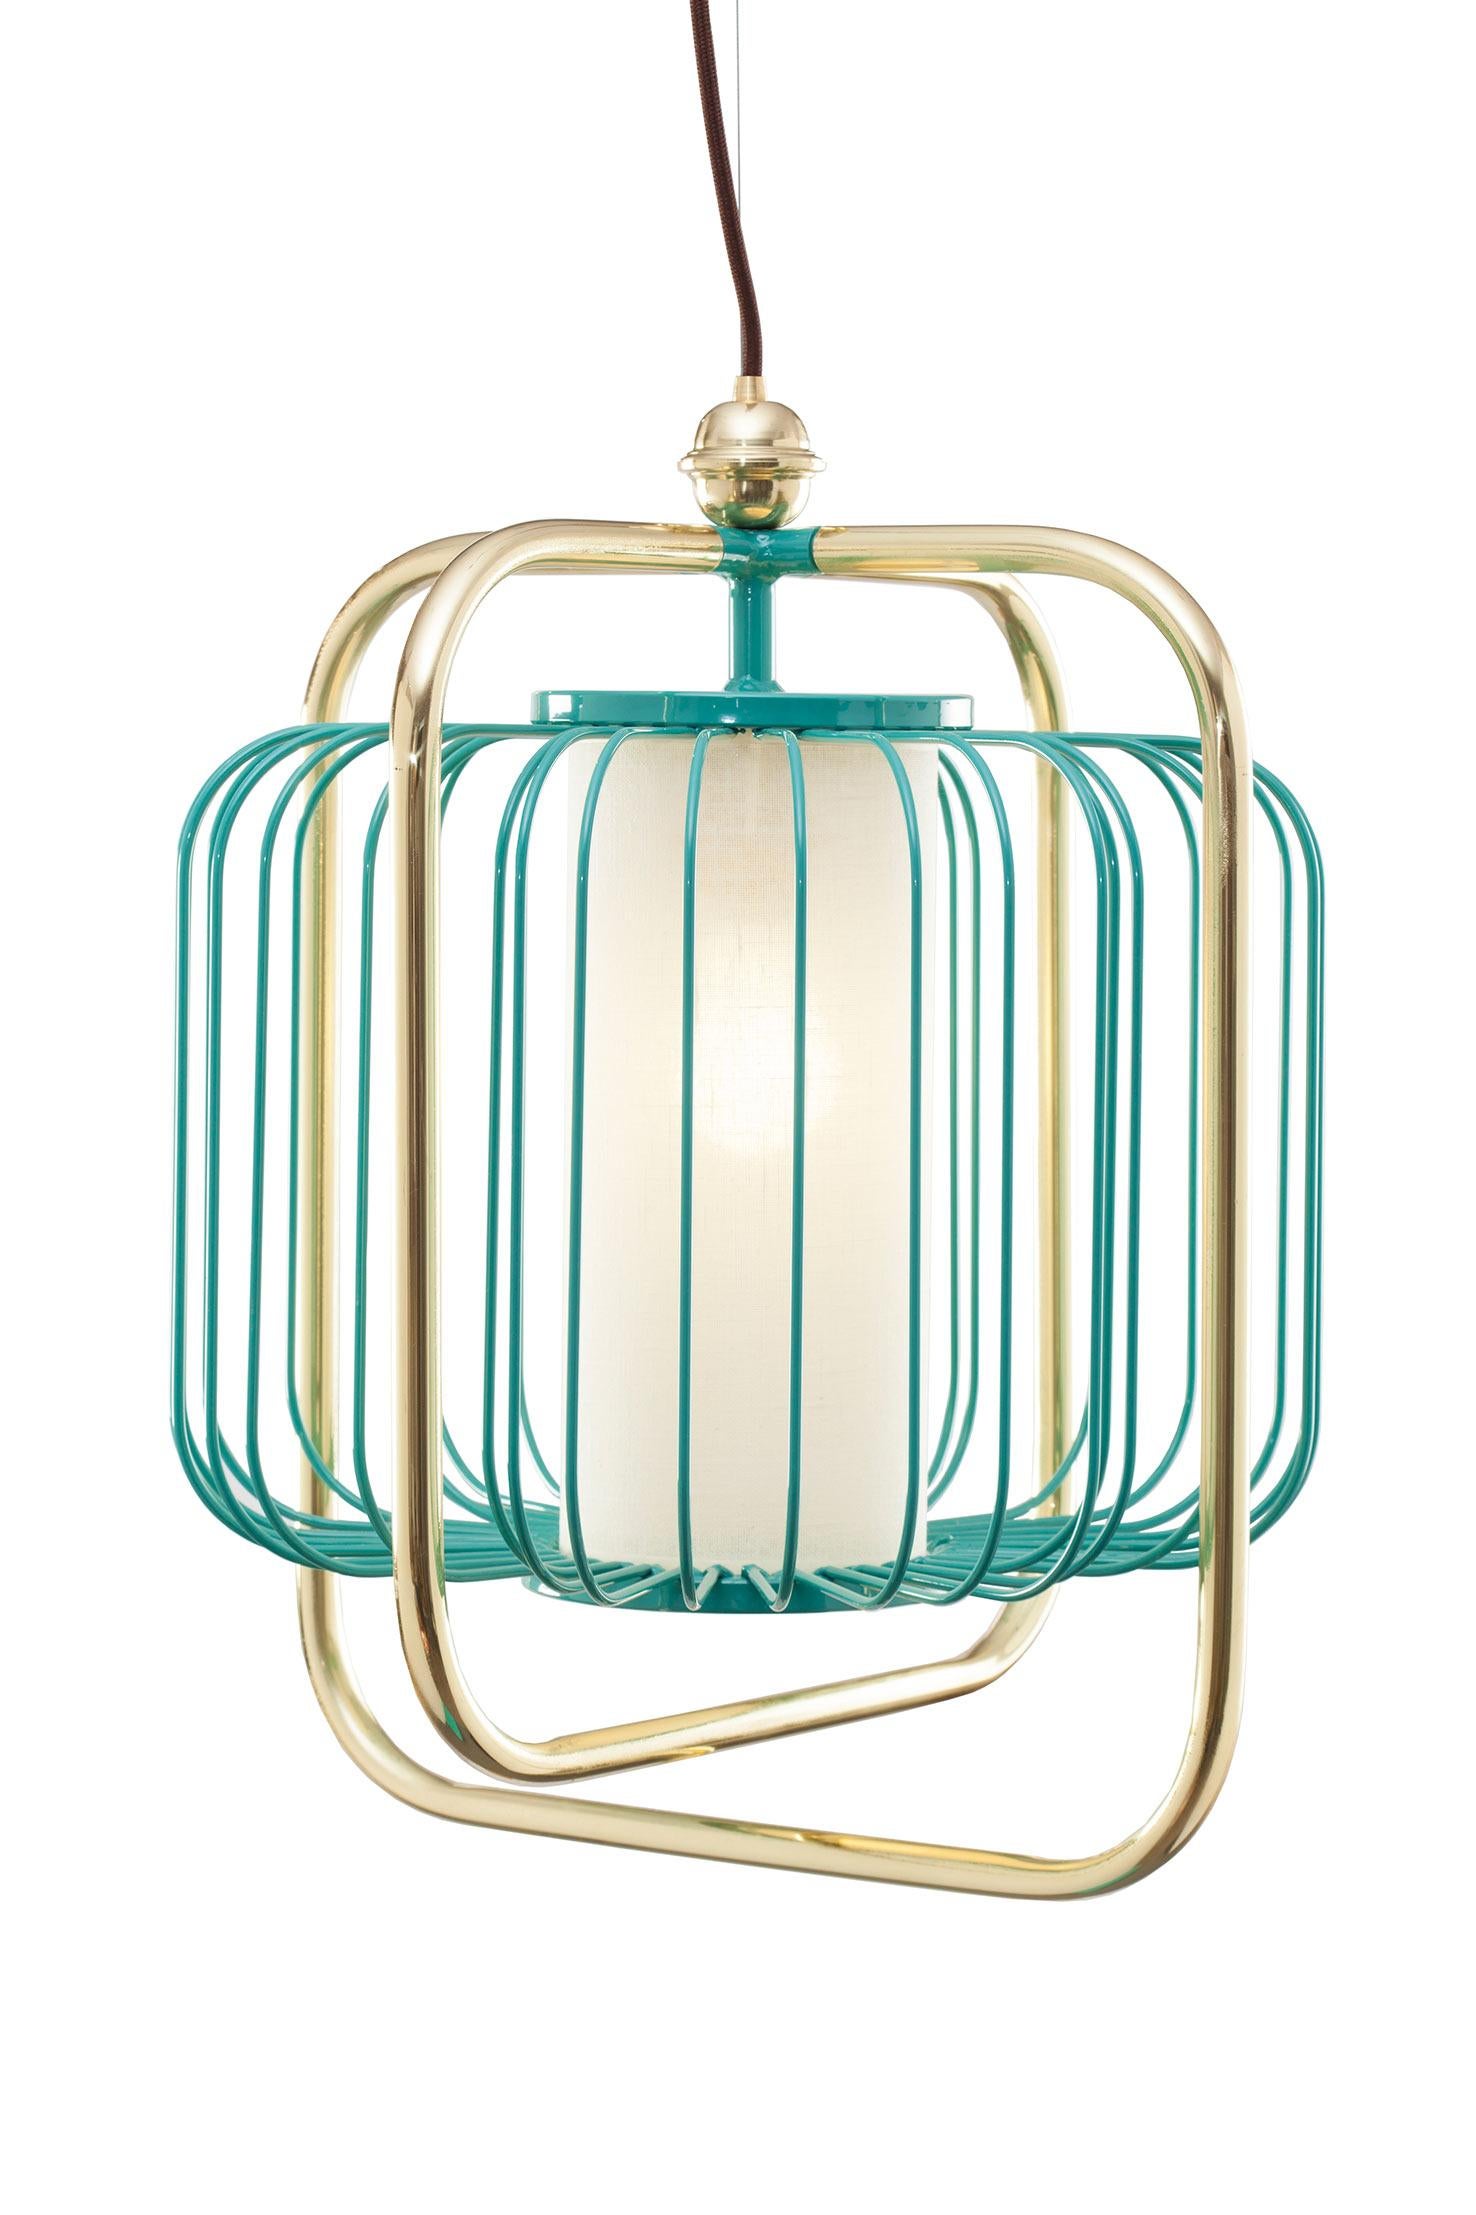 Jules is all about a timeless, effortless sophistication. A perfect combination of polished brass or copper with fun lacquered metal colors and a soft and elegant linen shade enclosed in the structure. Made to Order. 

For sales with delivery